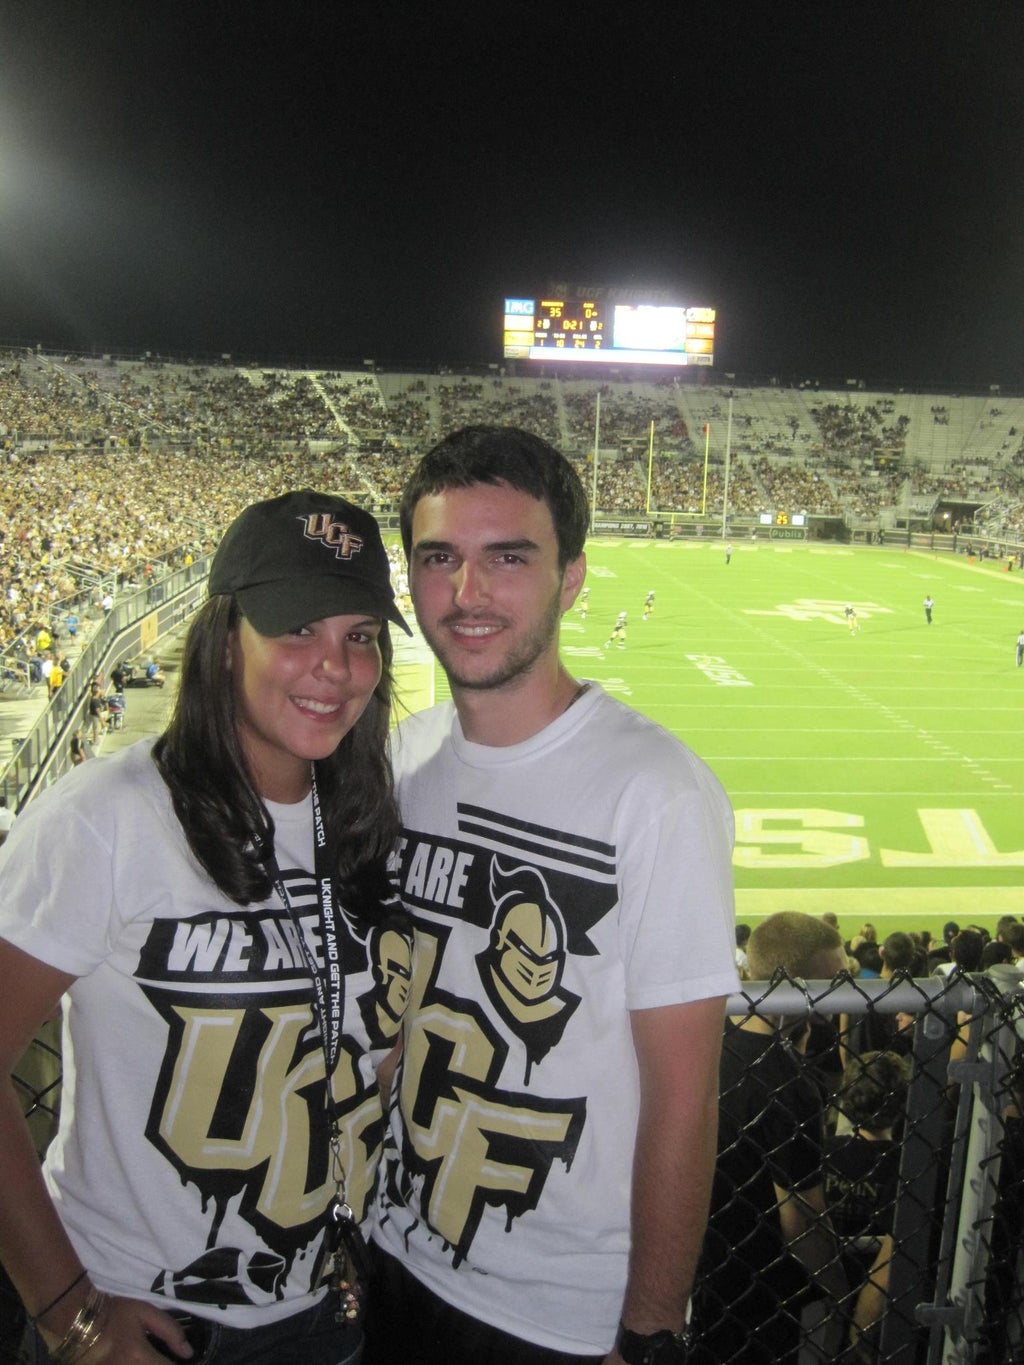 Amberli Kelly with husband at UCF (profile article, full permission, not for public use)